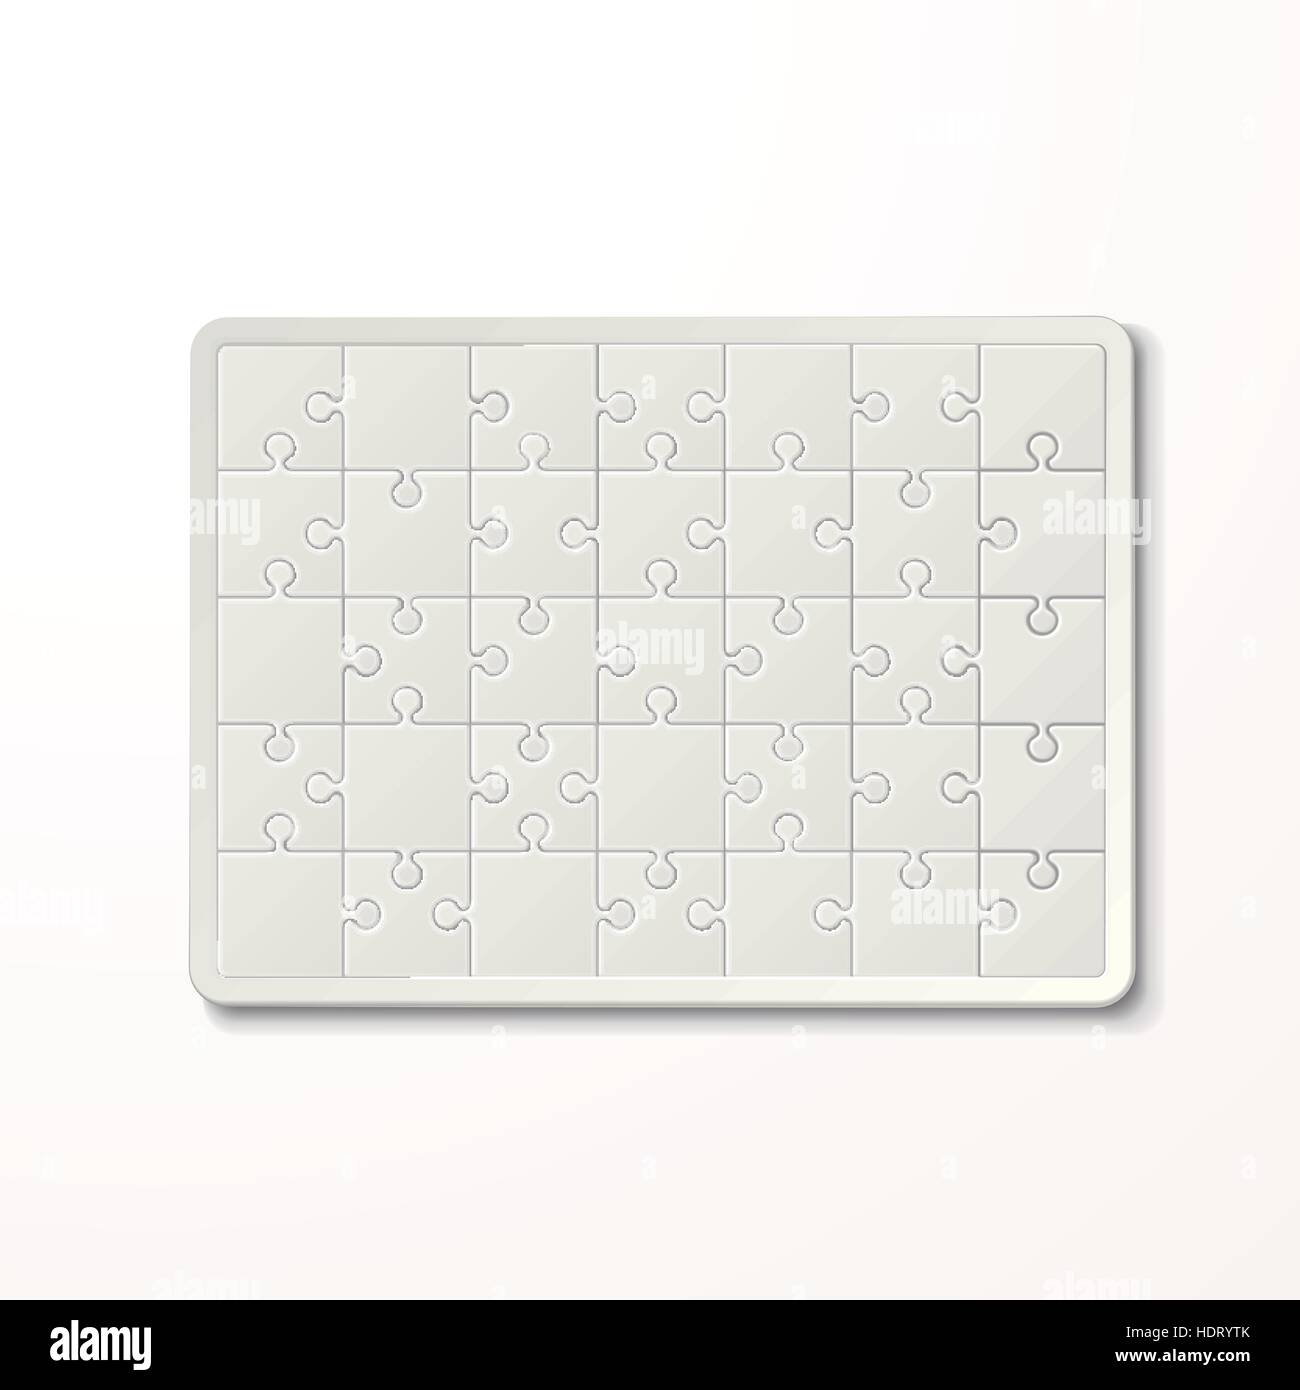 Blank puzzles Stock Vector Images - Alamy